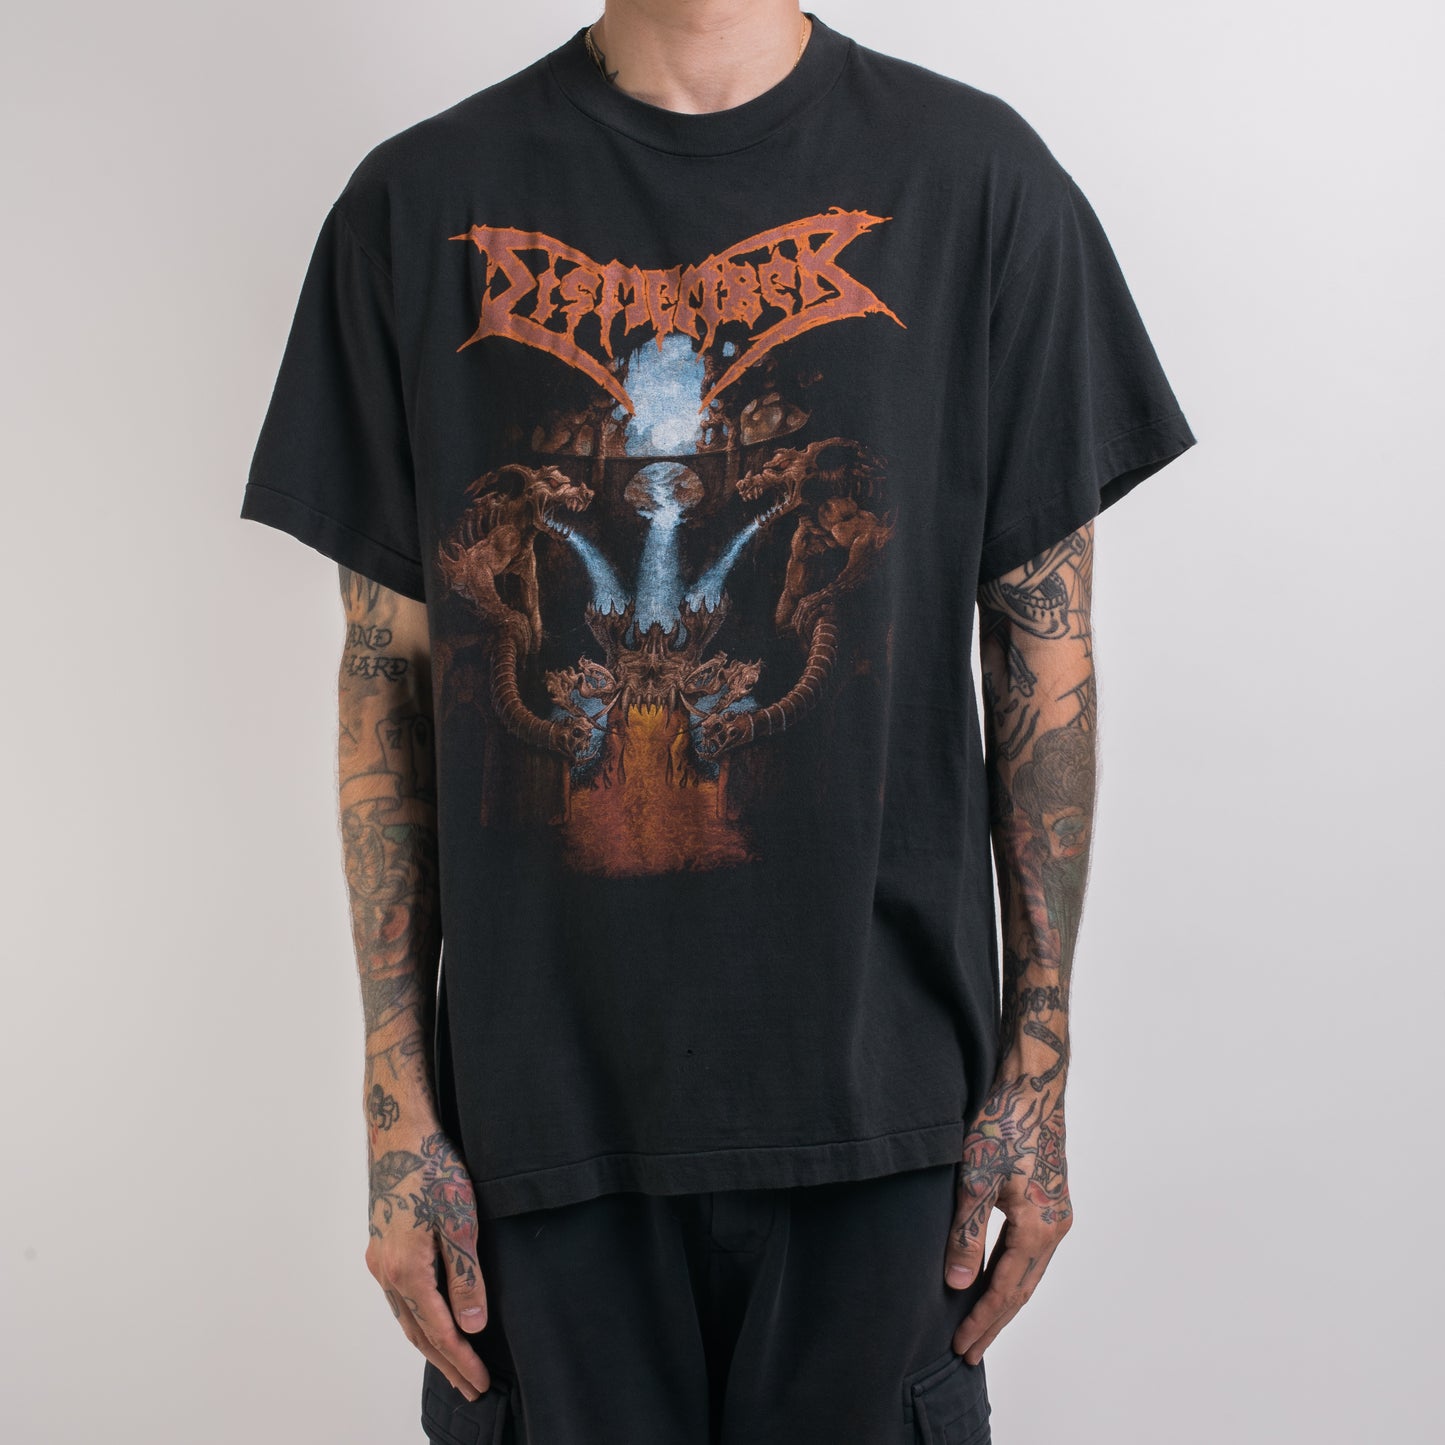 Vintage 90’s Dismember Like An Ever Flowing Stream T-Shirt